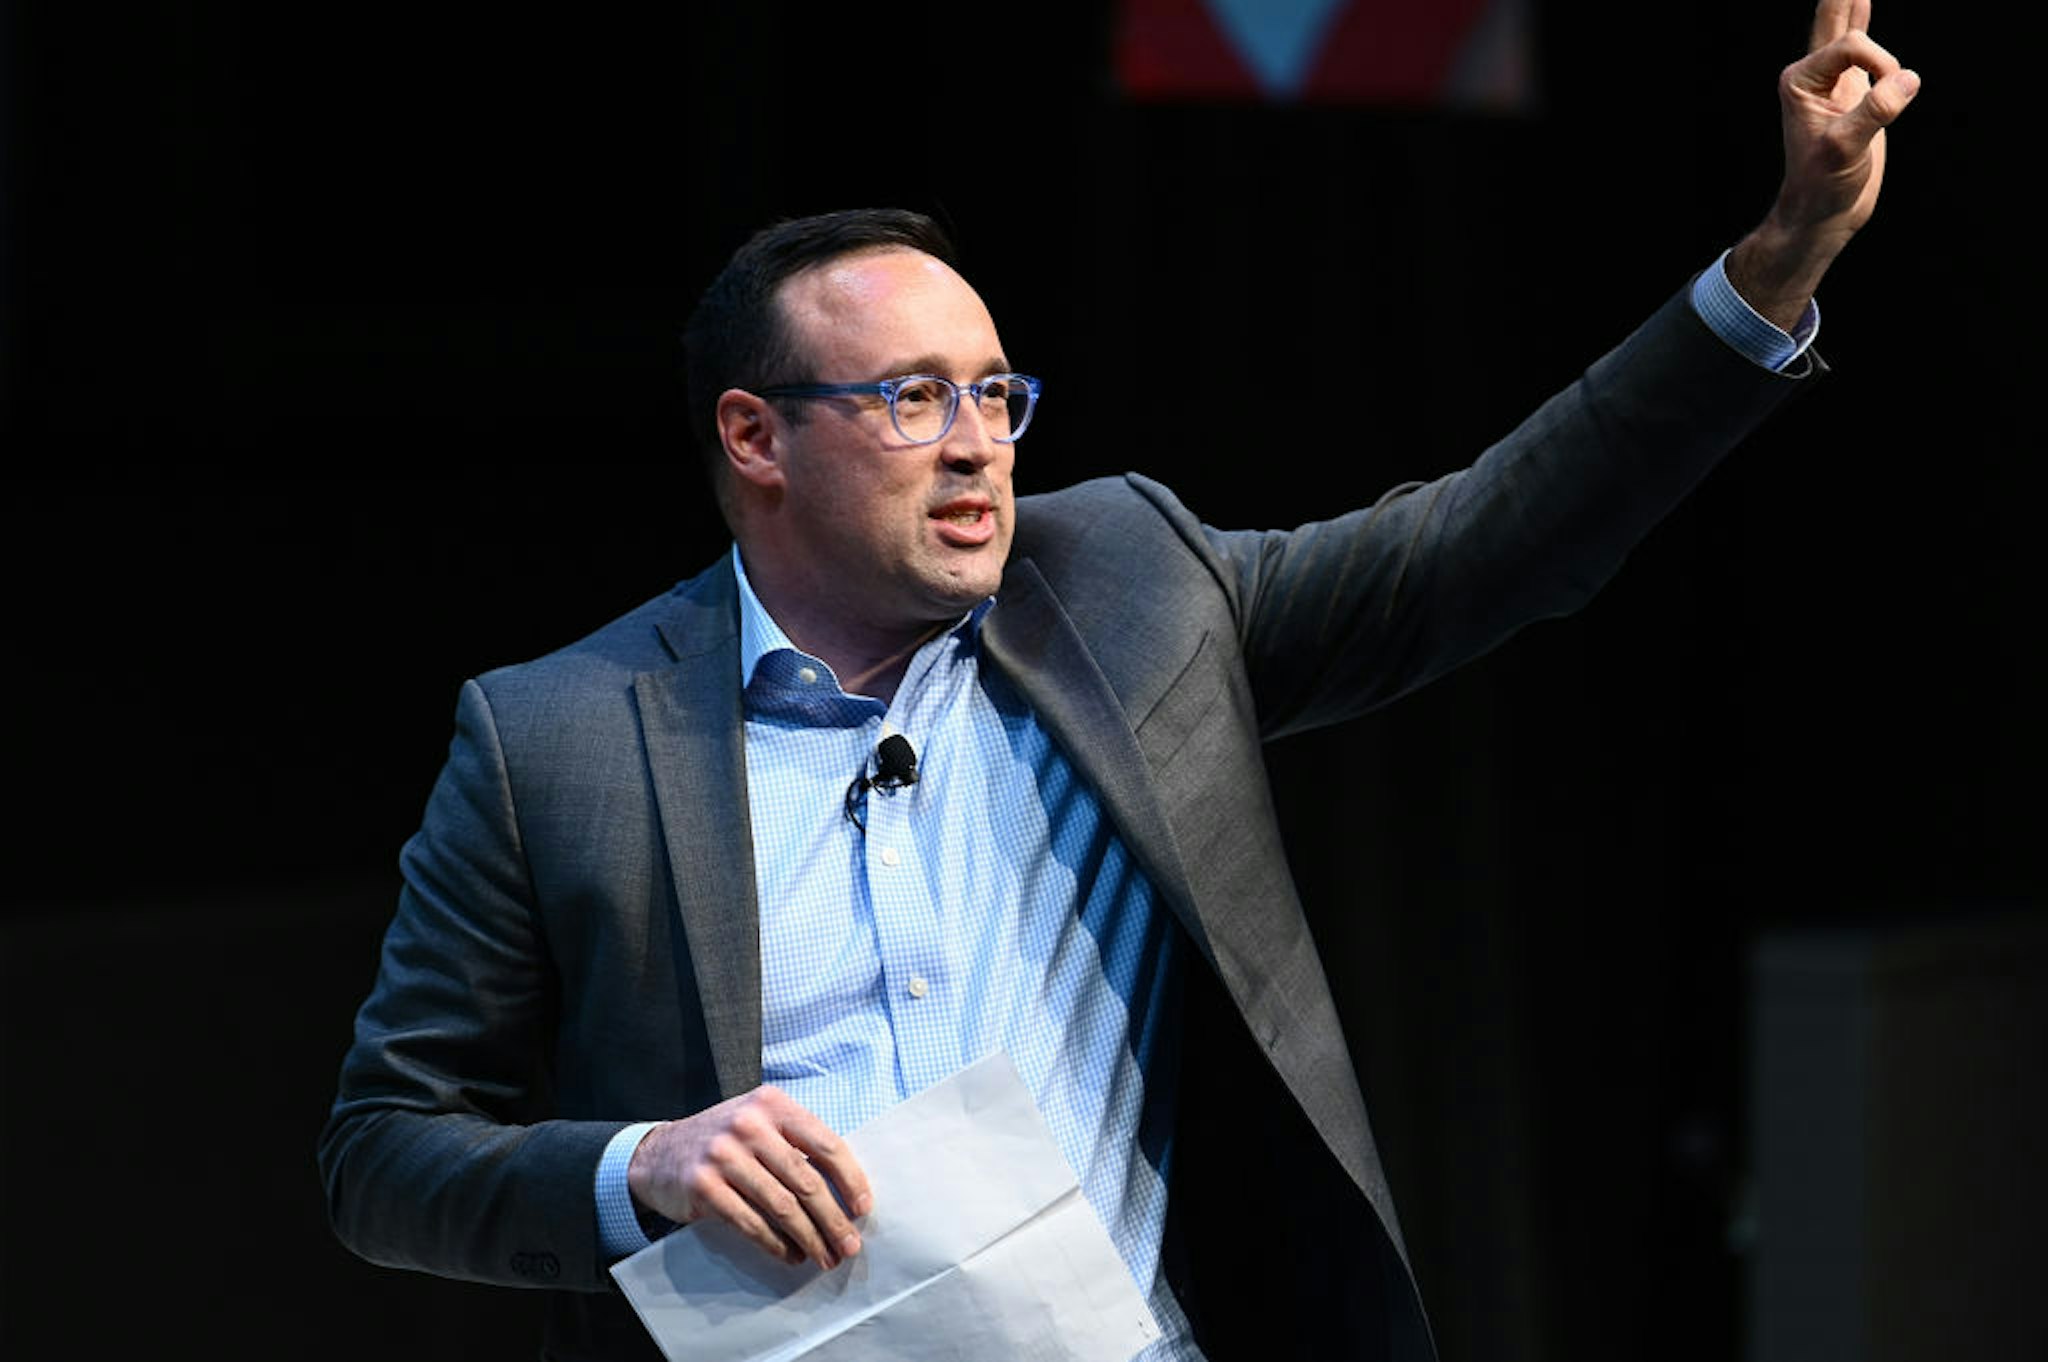 NEW YORK, NEW YORK - MARCH 05: Chris Cillizza speaks onstage during CNN Experience on March 05, 2020 in New York City. 749078 CNN Experience (Photo by Mike Coppola/Getty Images for WarnerMedia)